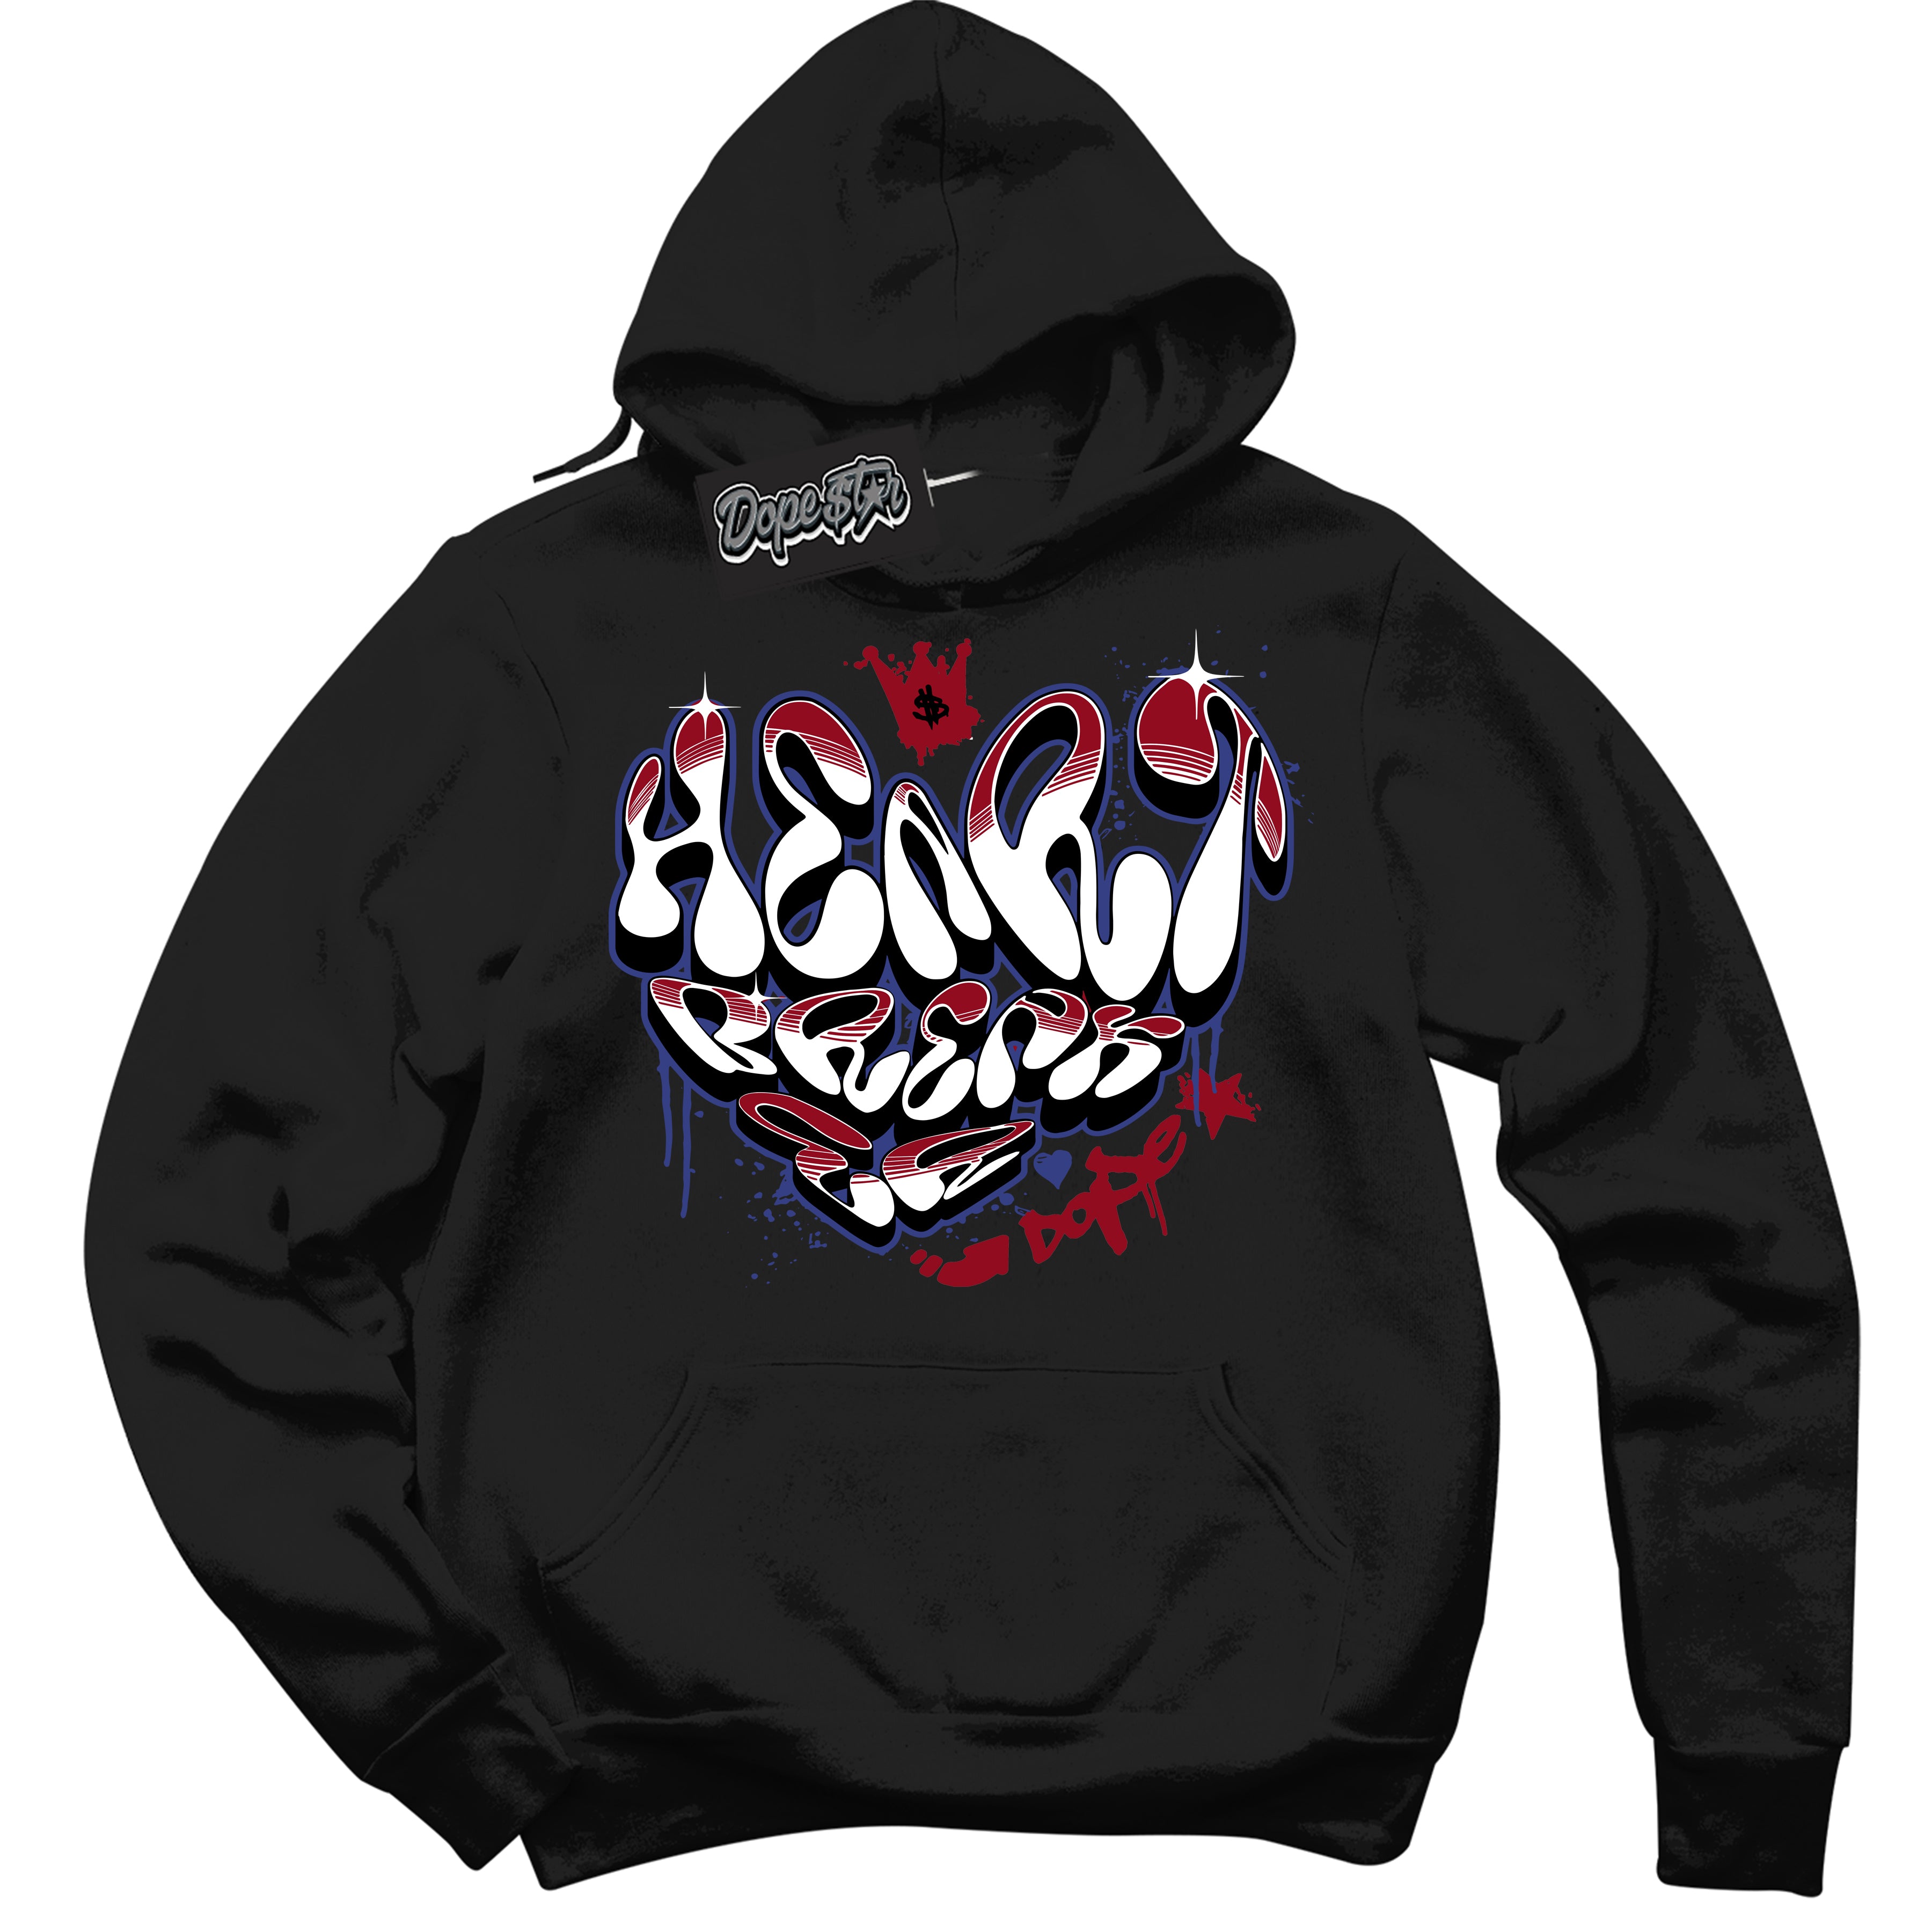 Cool Black Hoodie with “ HeartBreaker Graffiti ”  design that Perfectly Matches Playoffs 8s Sneakers.